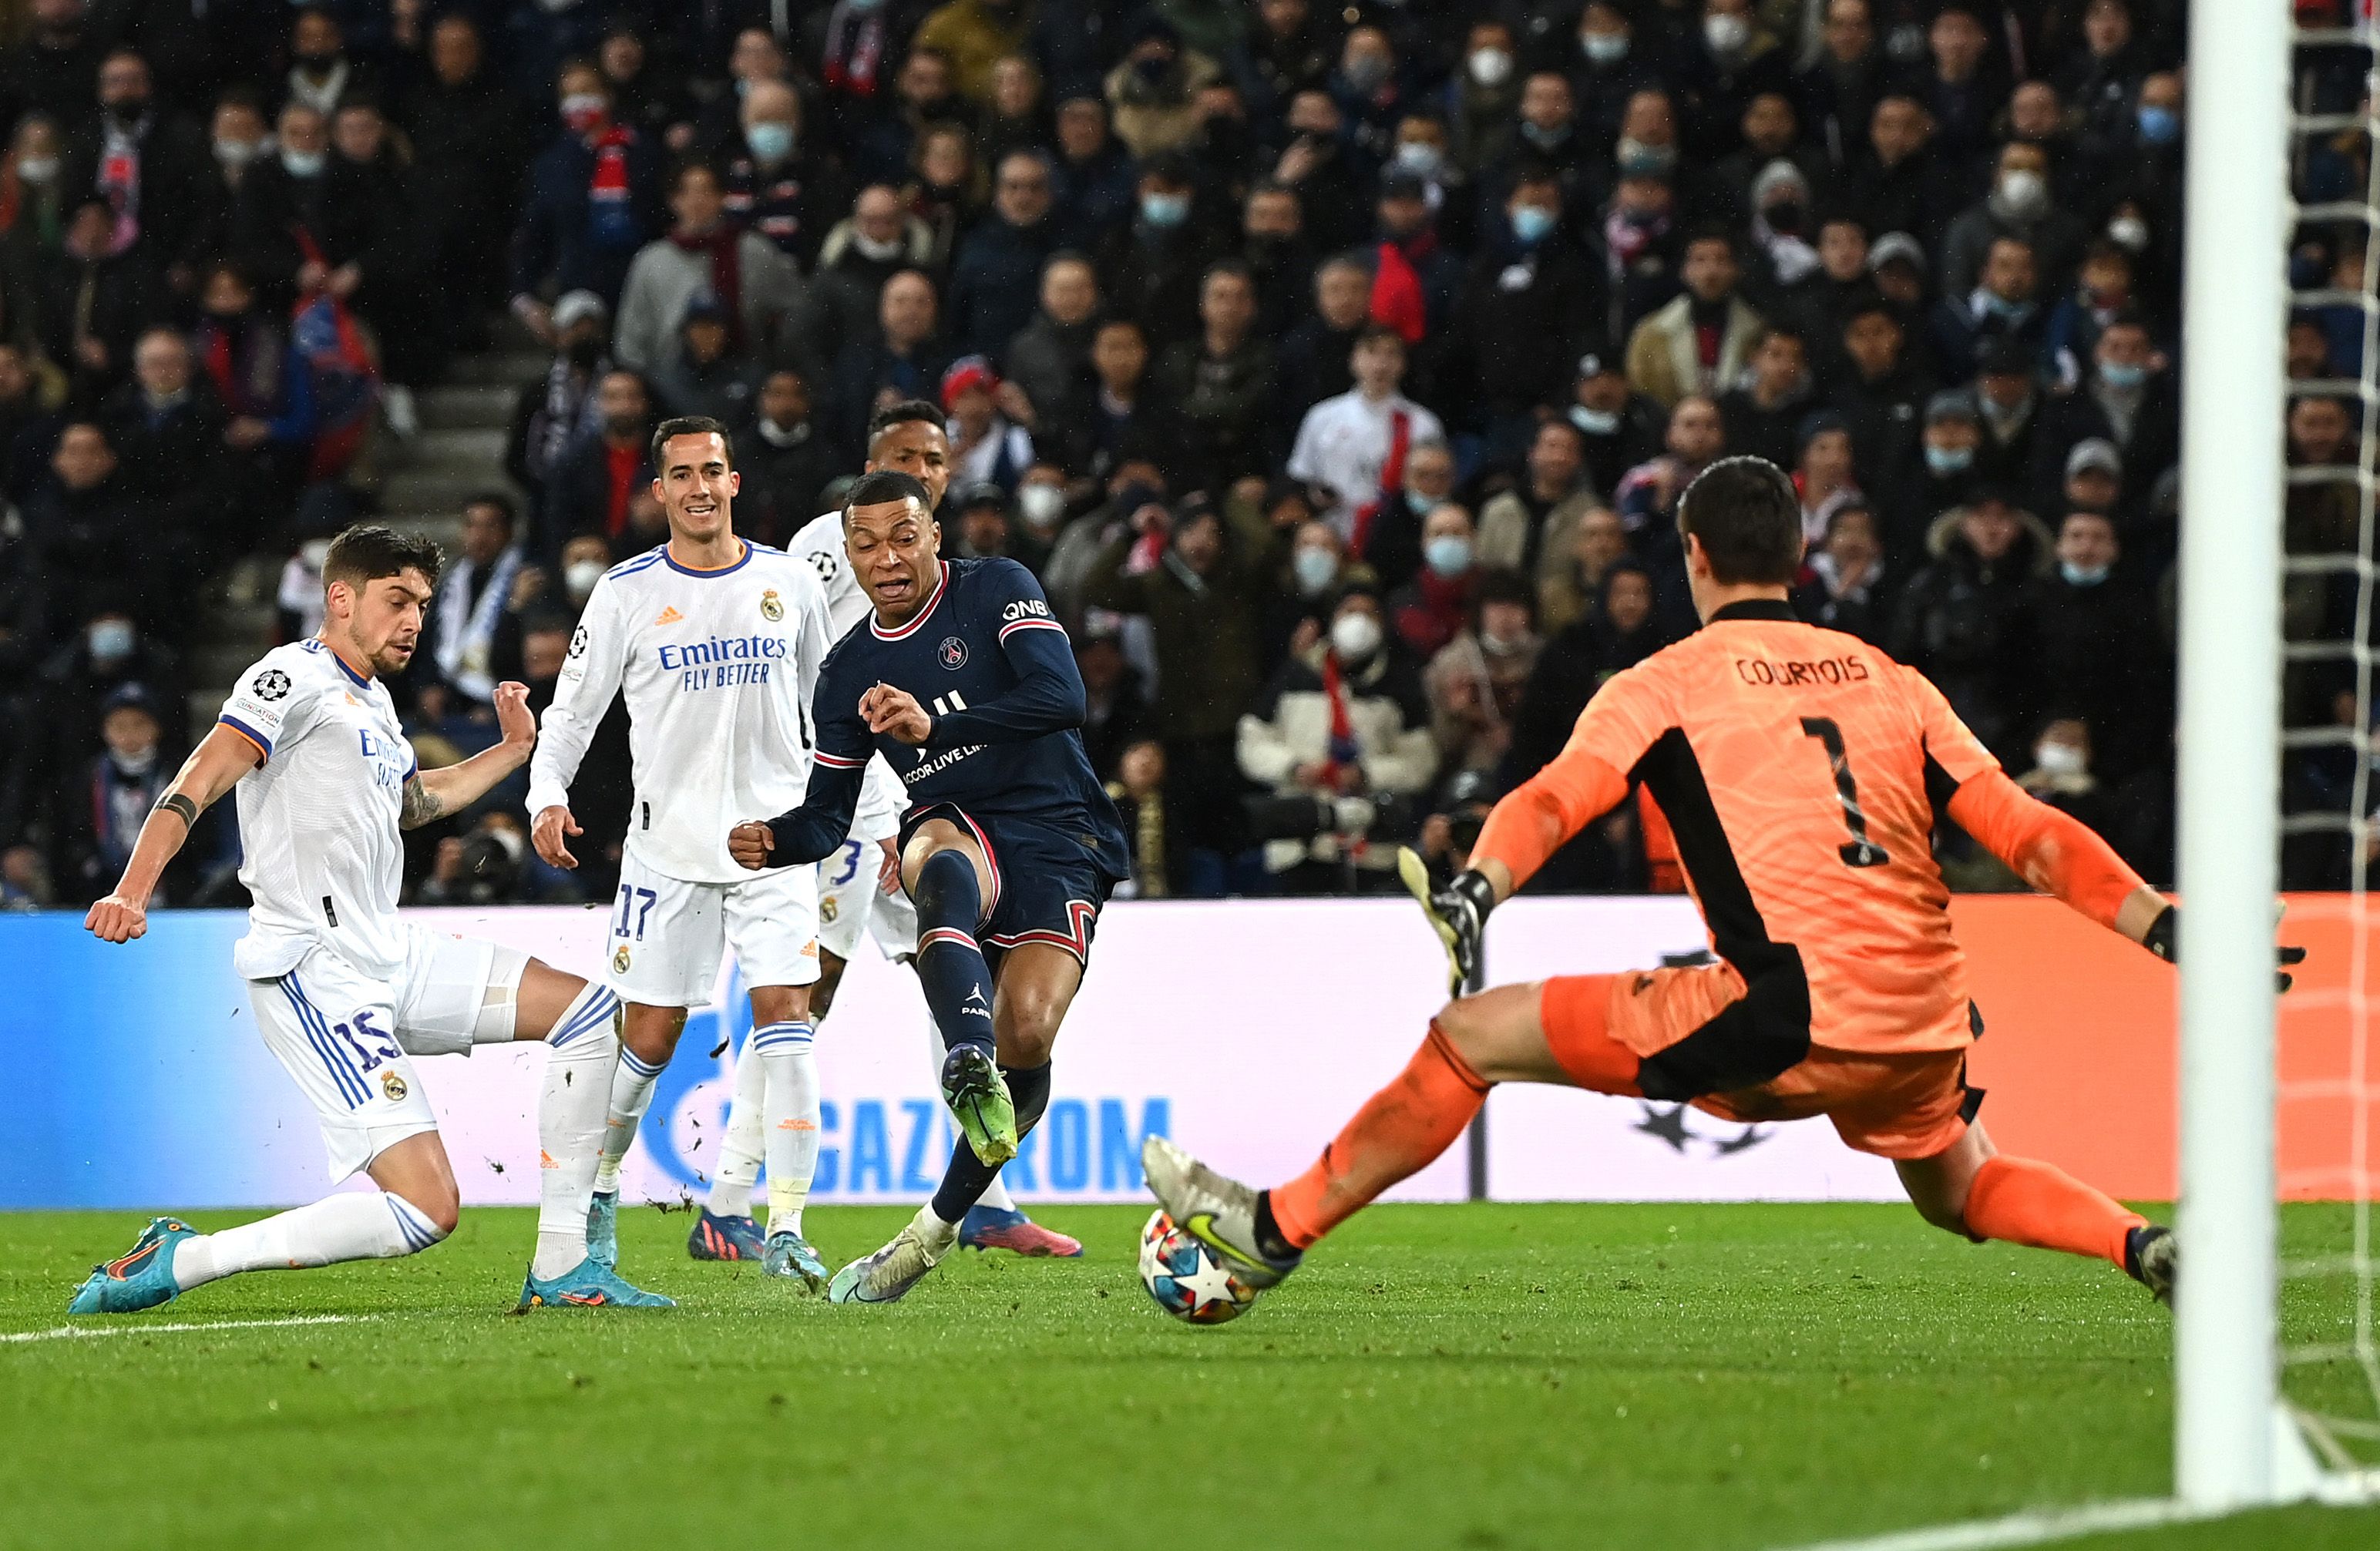 Kylian Mbappe of Paris Saint-Germain shoots to score past Thibaut Courtois of Real Madrid during the UEFA Champions League Round Of Sixteen First Leg match between Paris Saint-Germain and Real Madrid at Parc des Princes on February 15, 2022 in Paris, France.